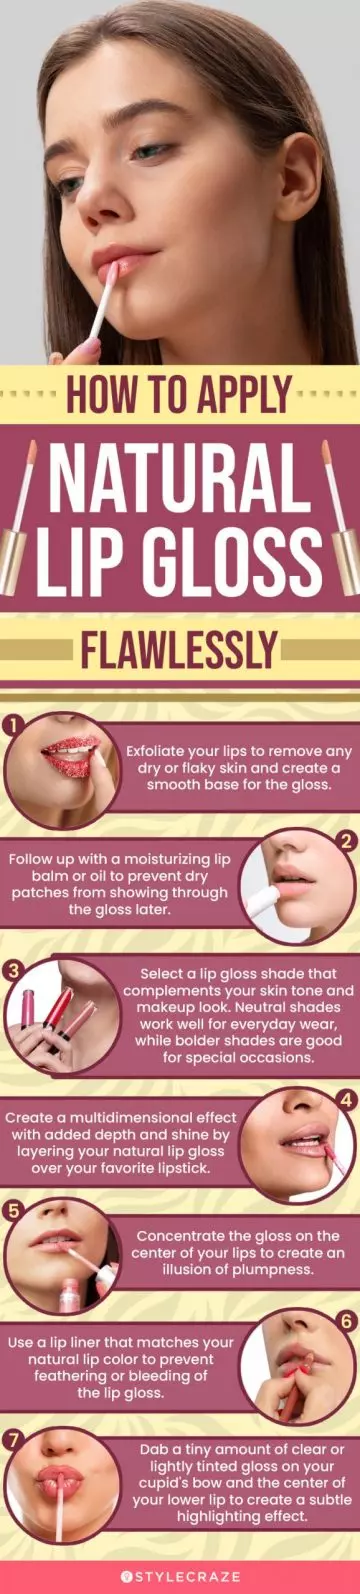 How To Apply Natural Lip Gloss Flawlessly (infographic)